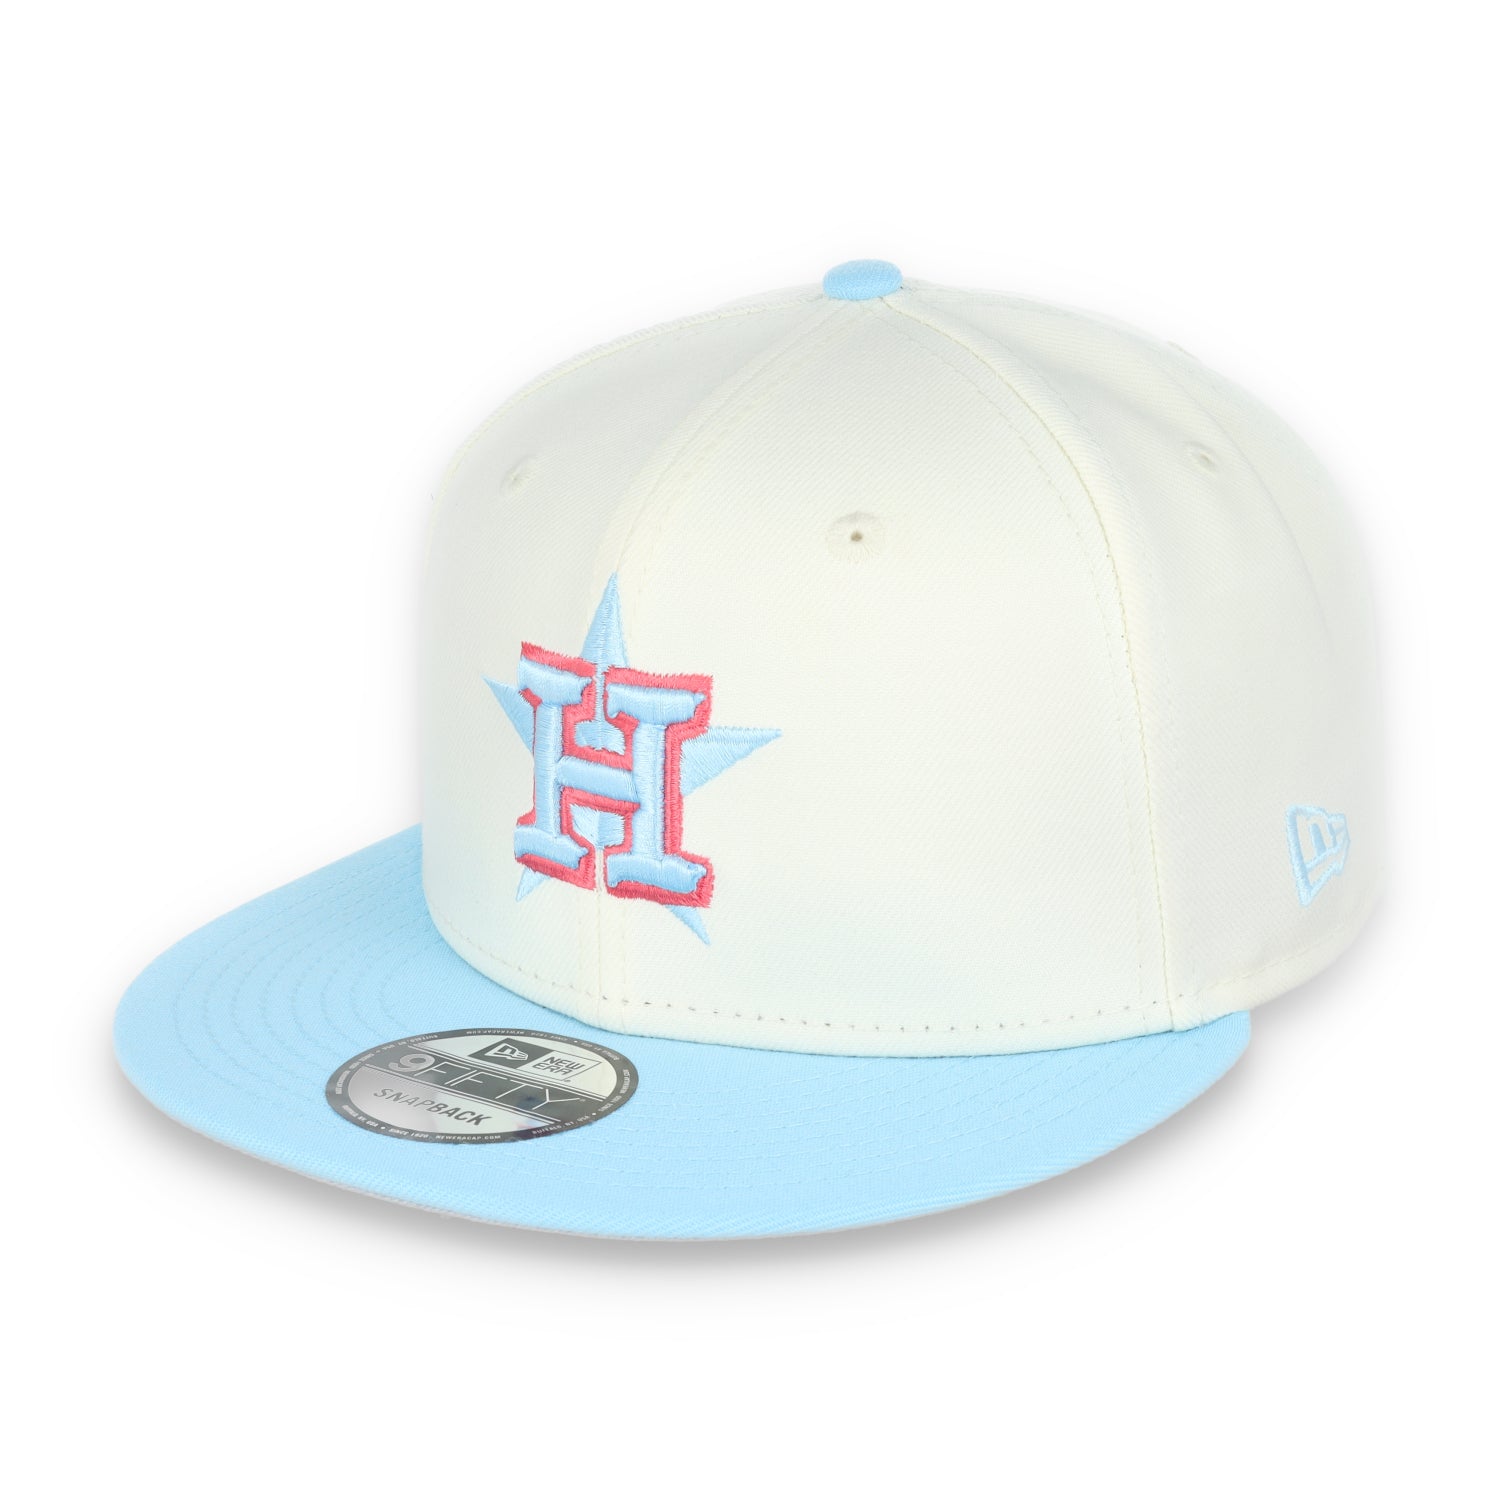 New Era Houston Astros 2-Tone Color Pack 9FIFTY Snapback Hat-Chrome/Baby Blue